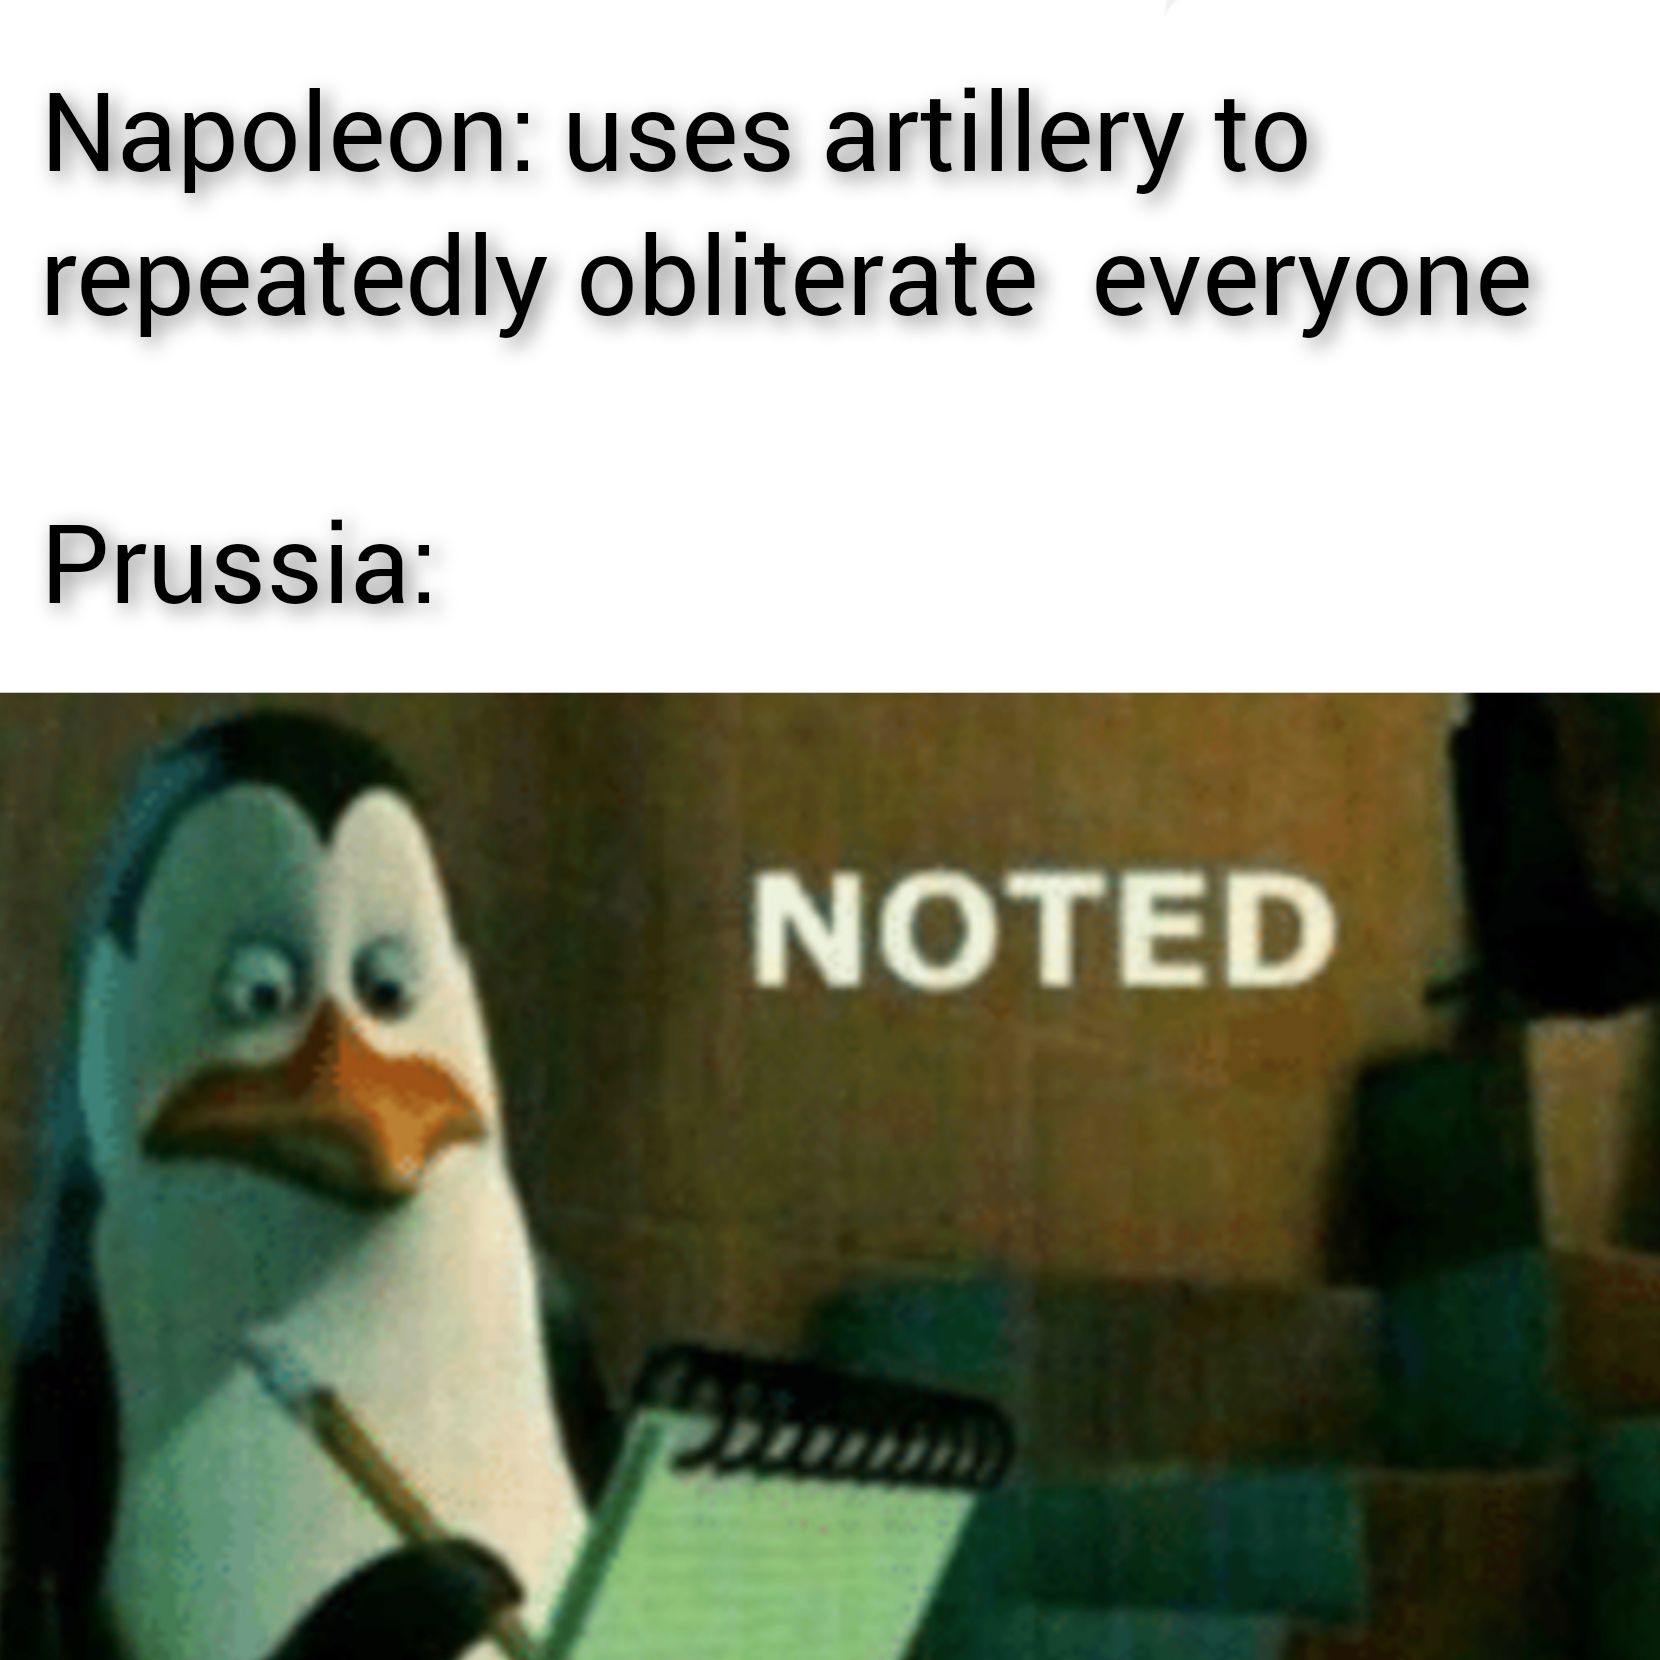 Superiority artillery doctrine is how Prussia crushed France in 1870/71